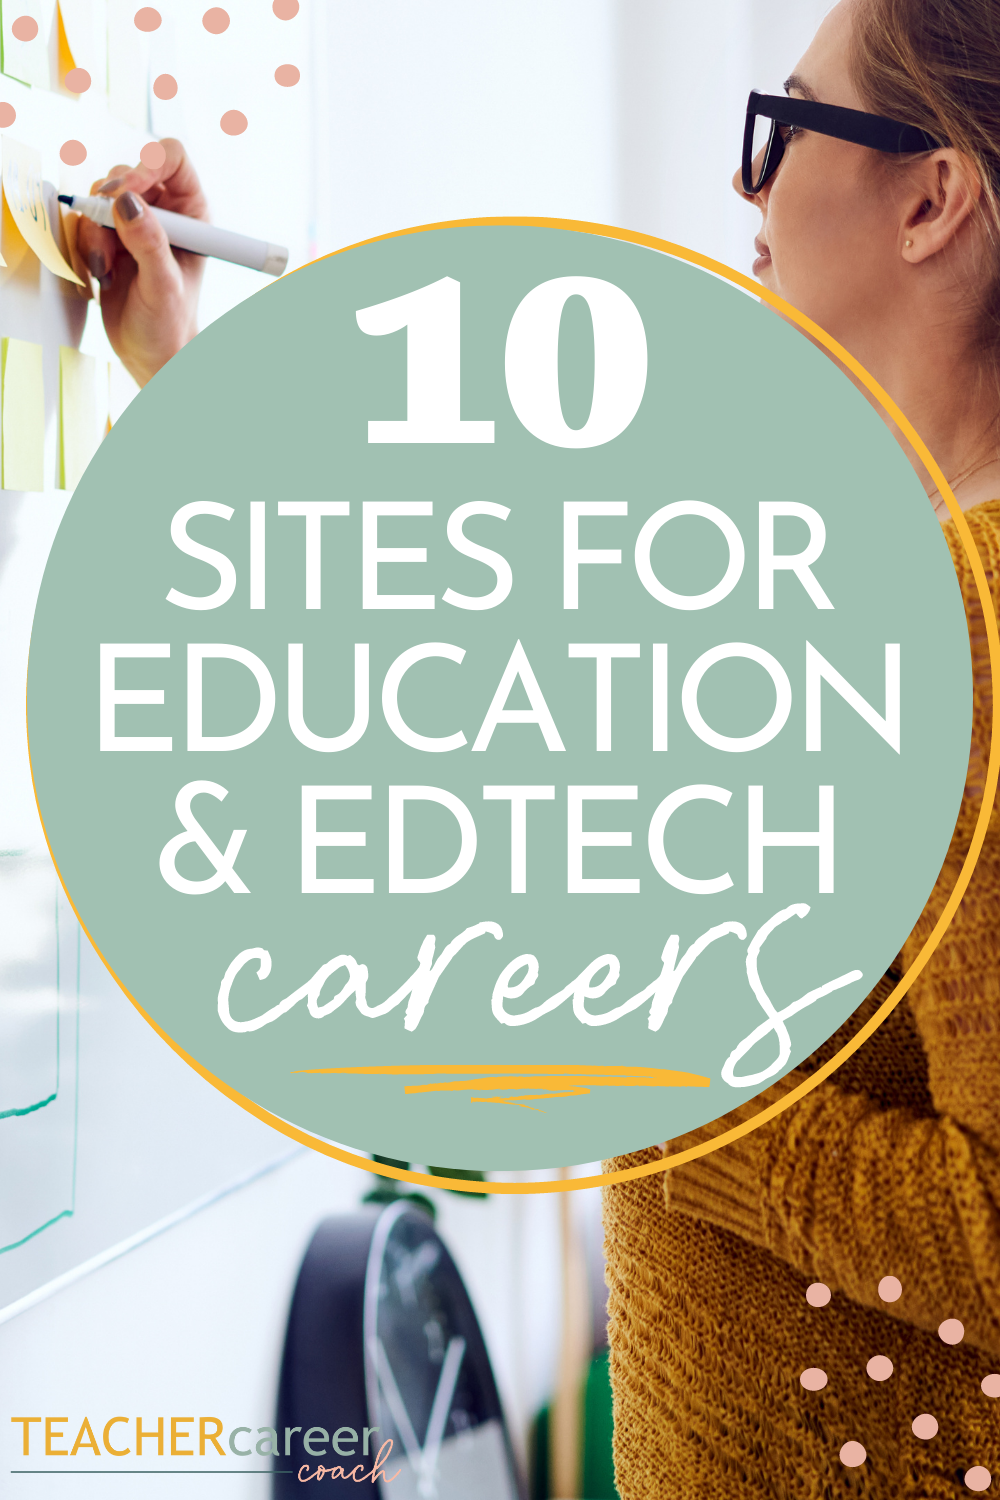 education-edtech-jobs-top-10-places-to-find-jobs